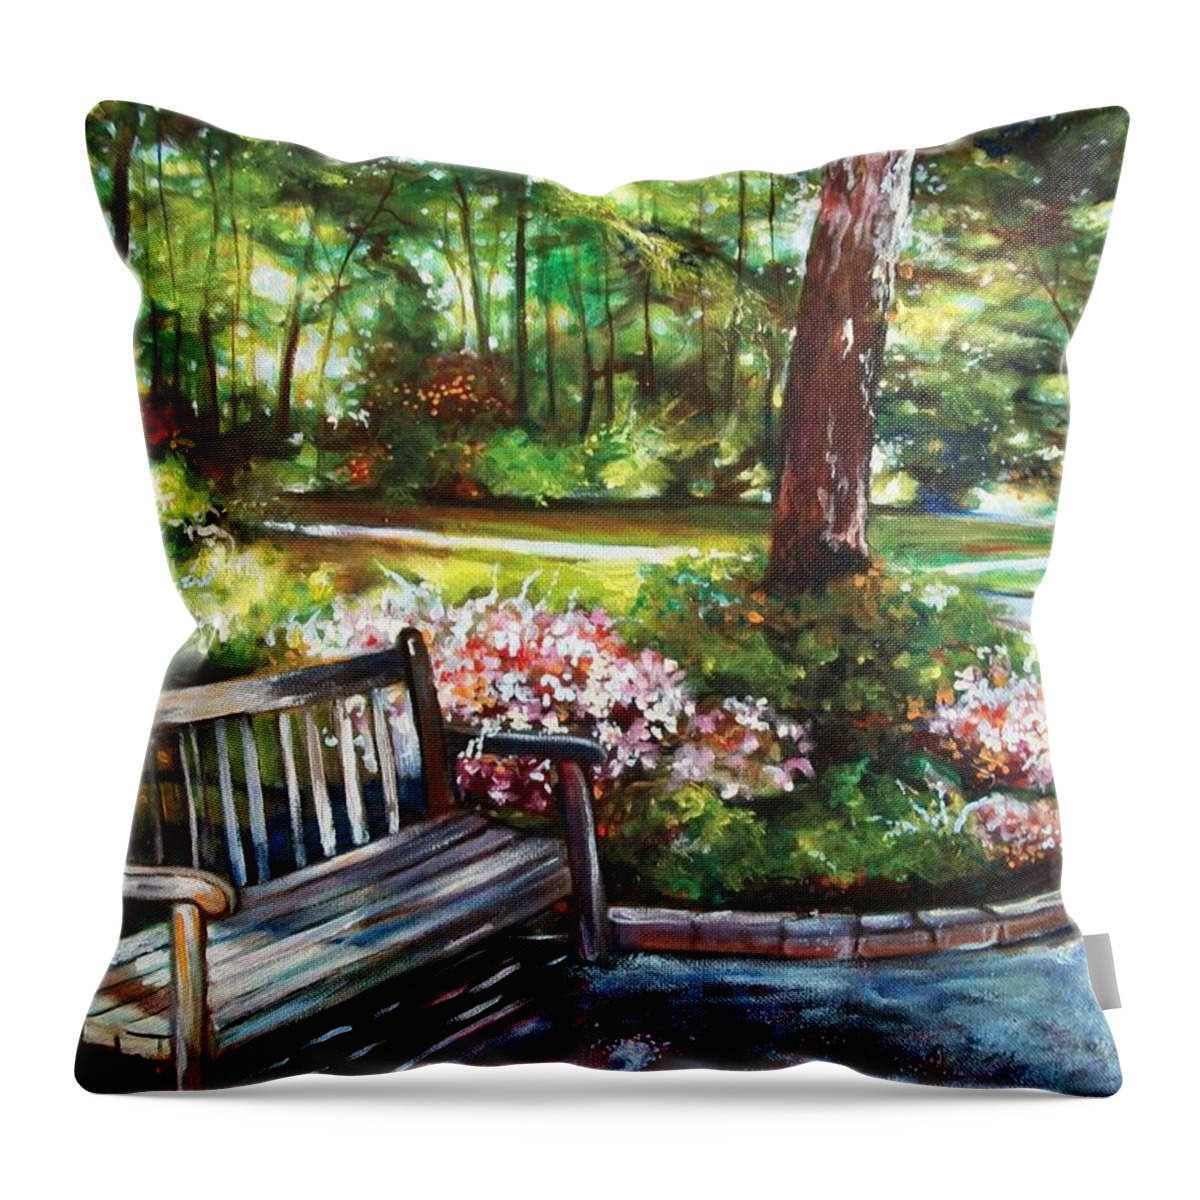 Landscape Throw Pillow featuring the painting One Day by Emery Franklin